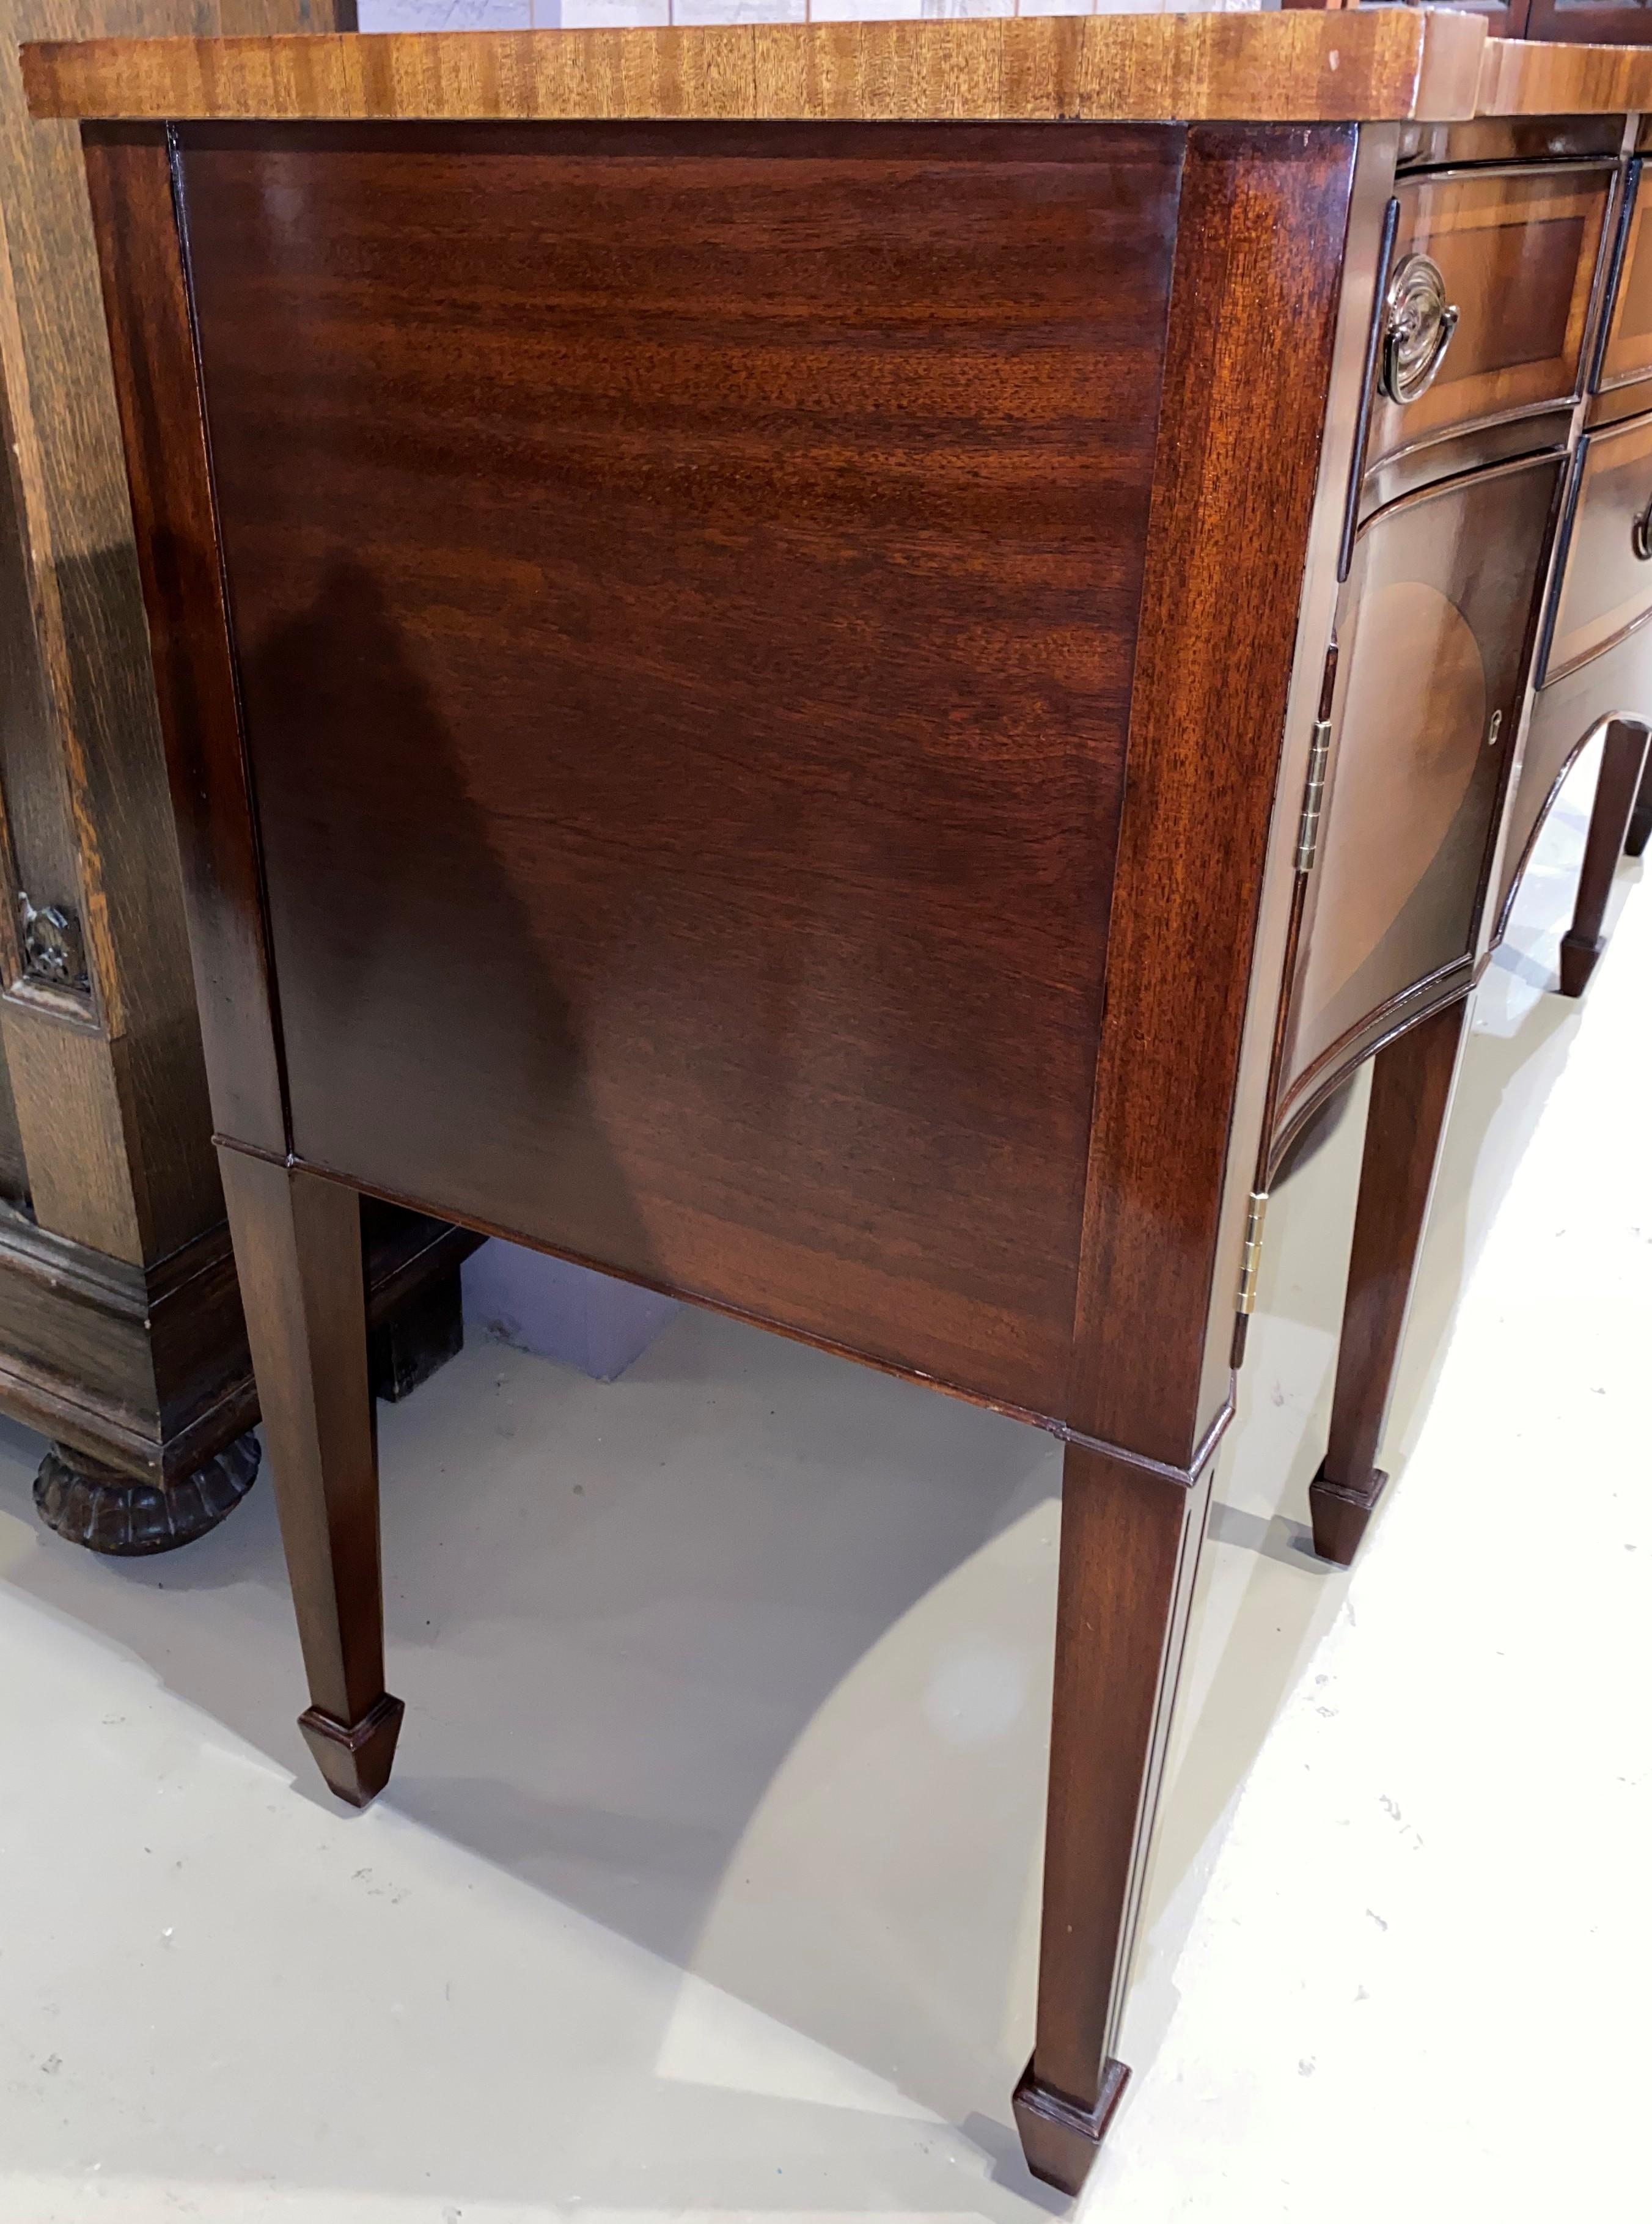 20th Century Trosby Furniture Sussex Georgian Style Sideboard in Mahogany and Inlaid Yew Wood